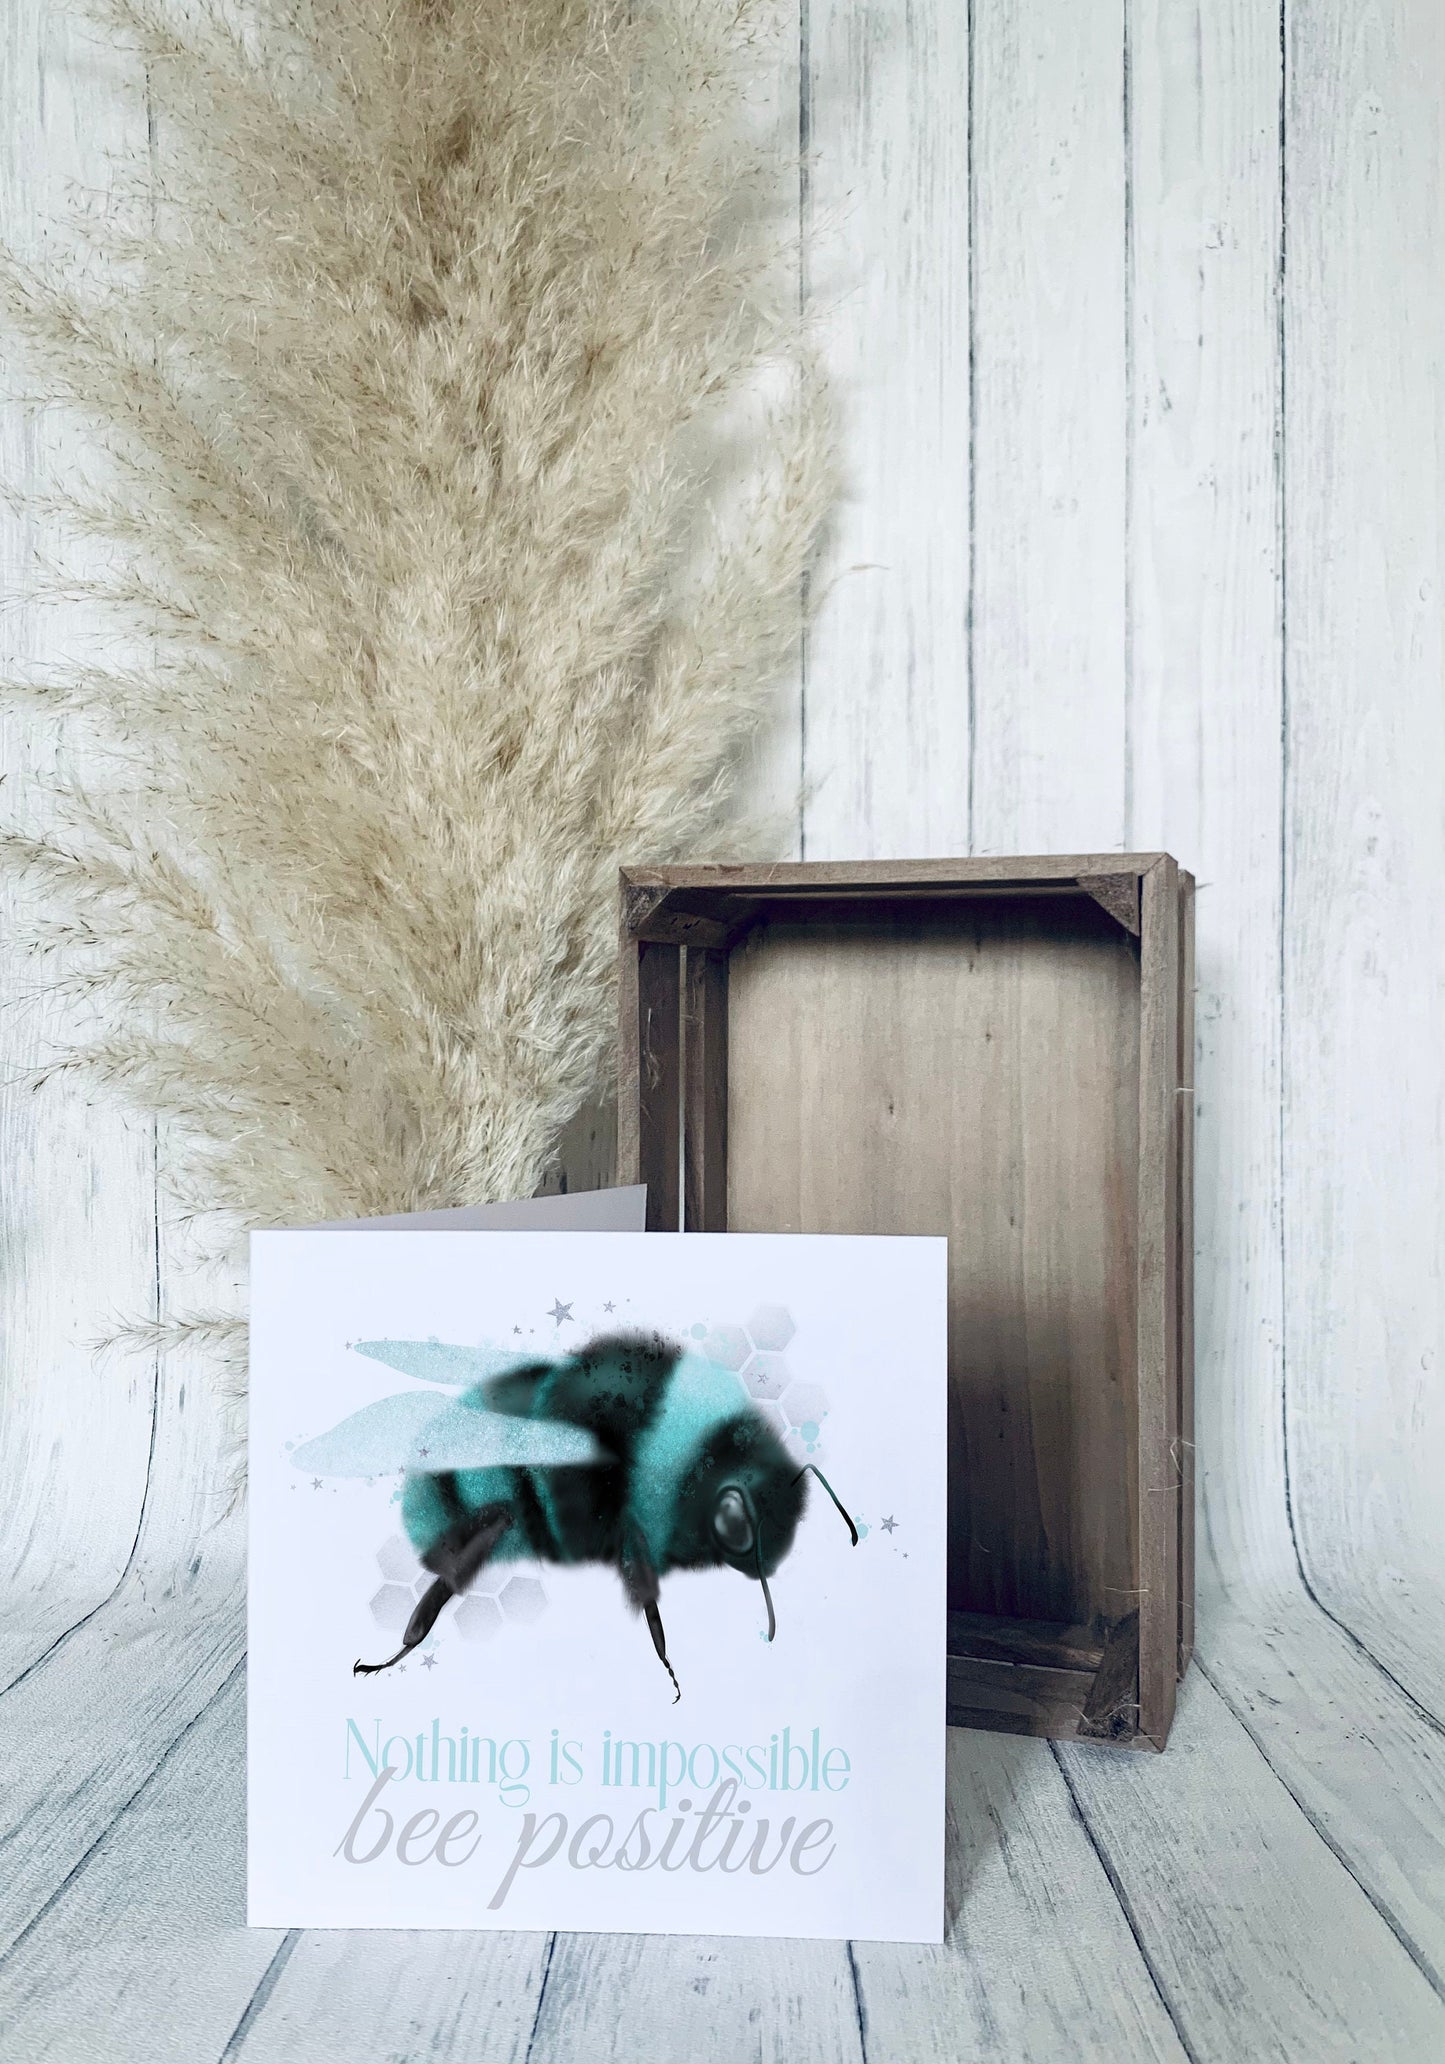 Bee positive teal bumble bee greeting card